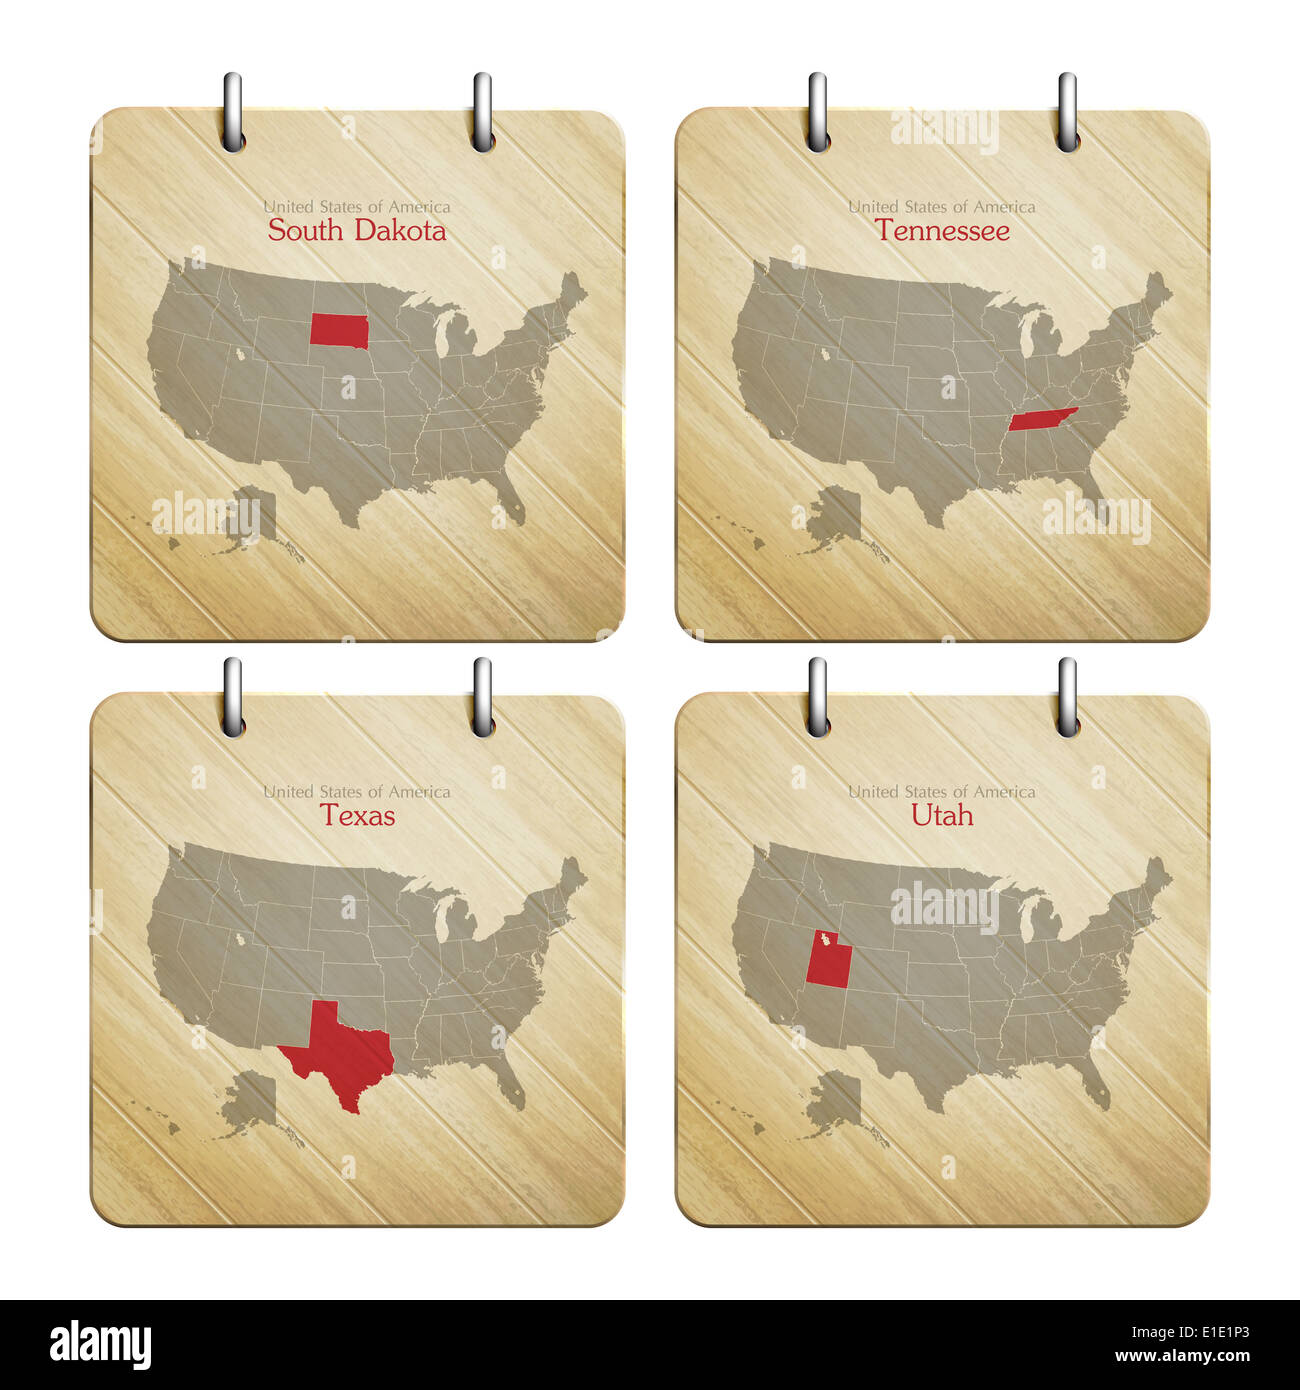 United States of America map on wooden icons Stock Photo